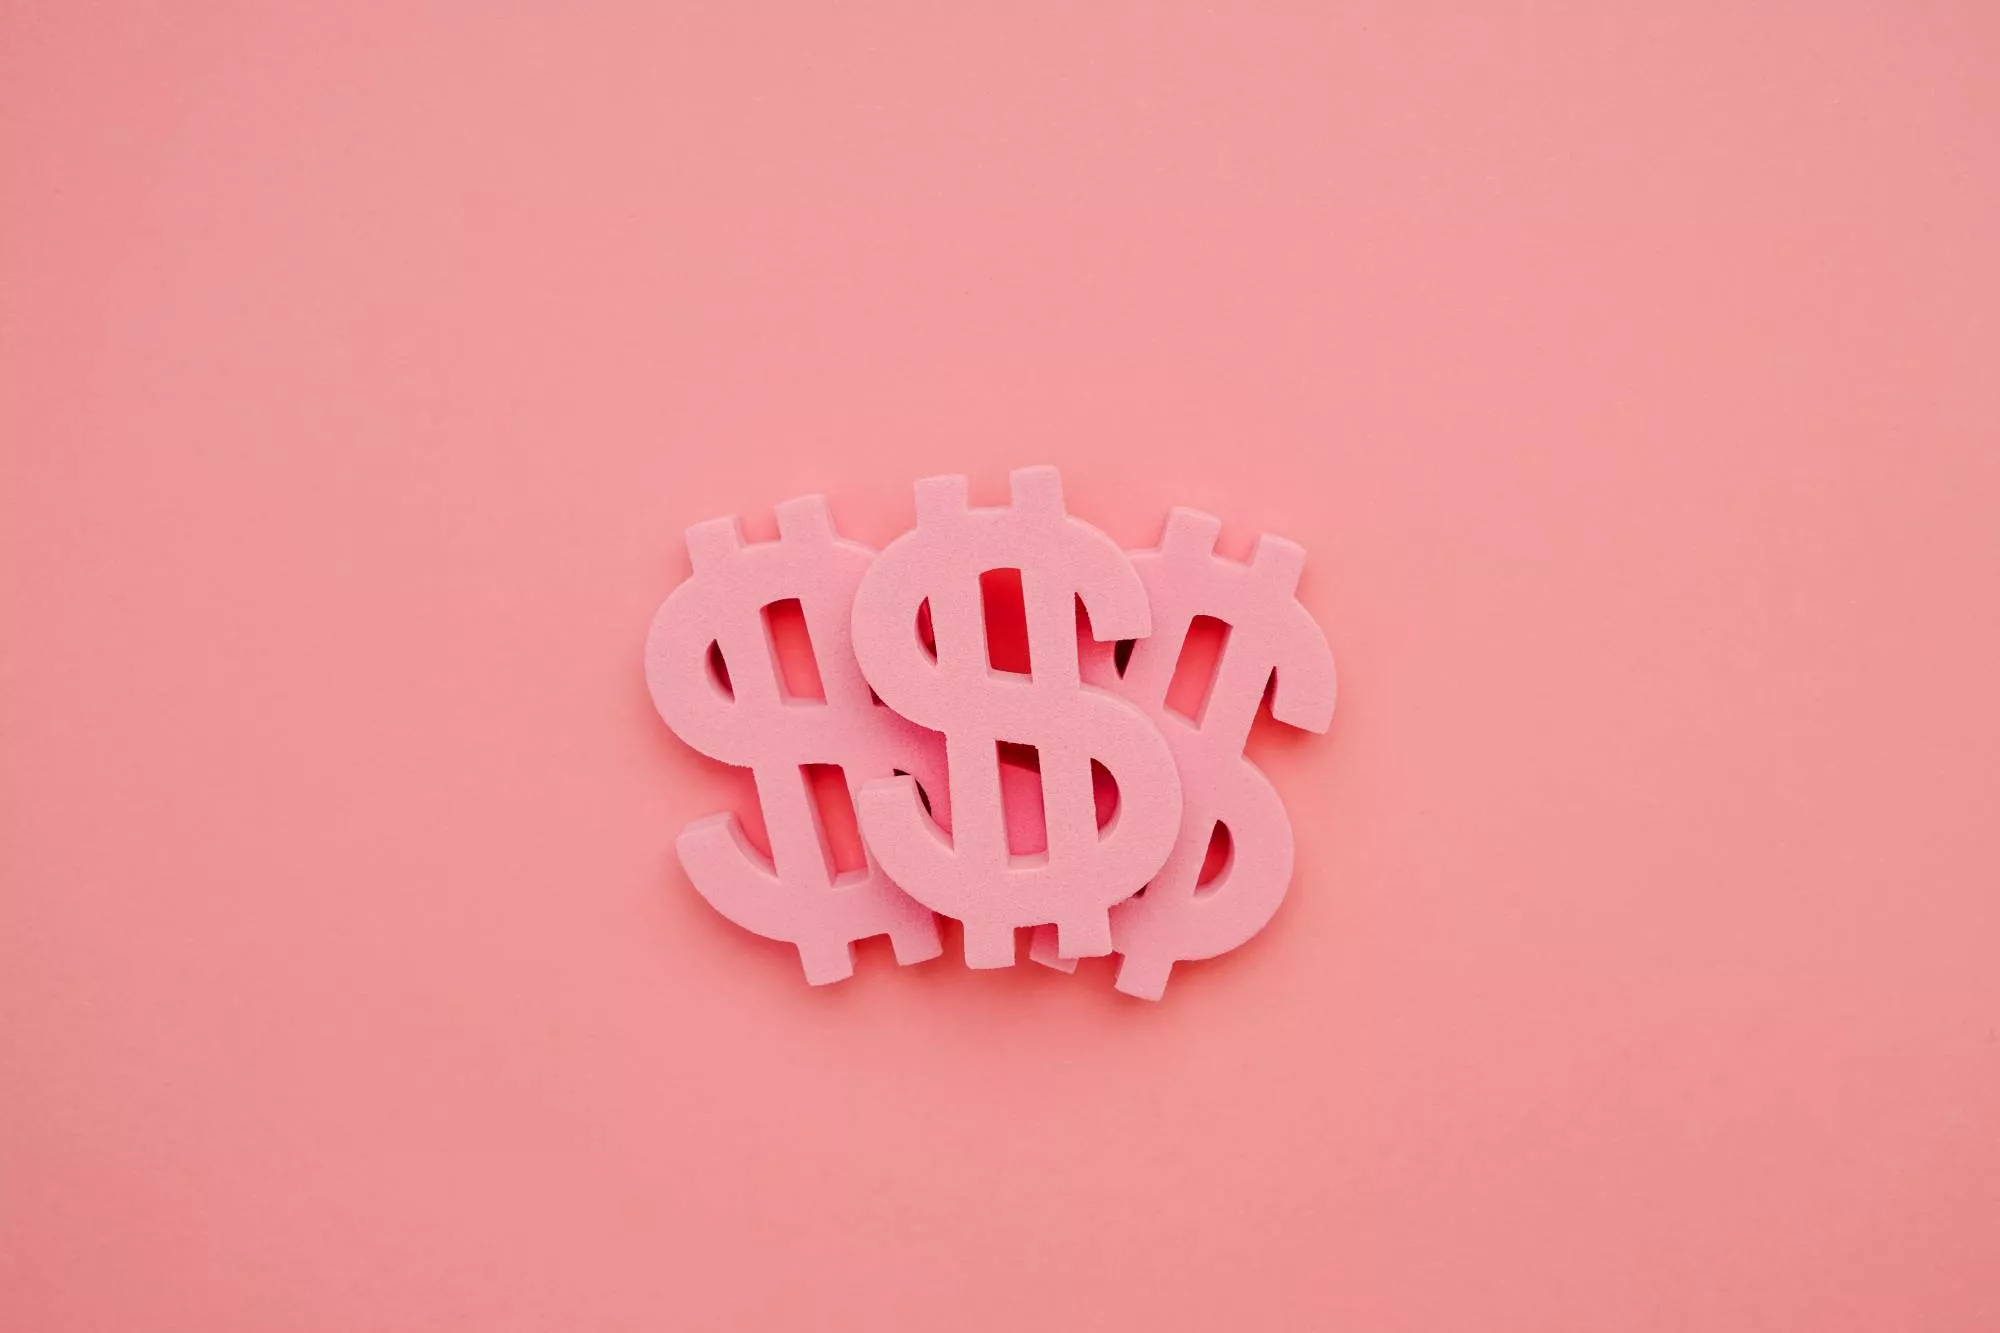 Pink dollar sign magnets against a pink background to represent gateway fees.